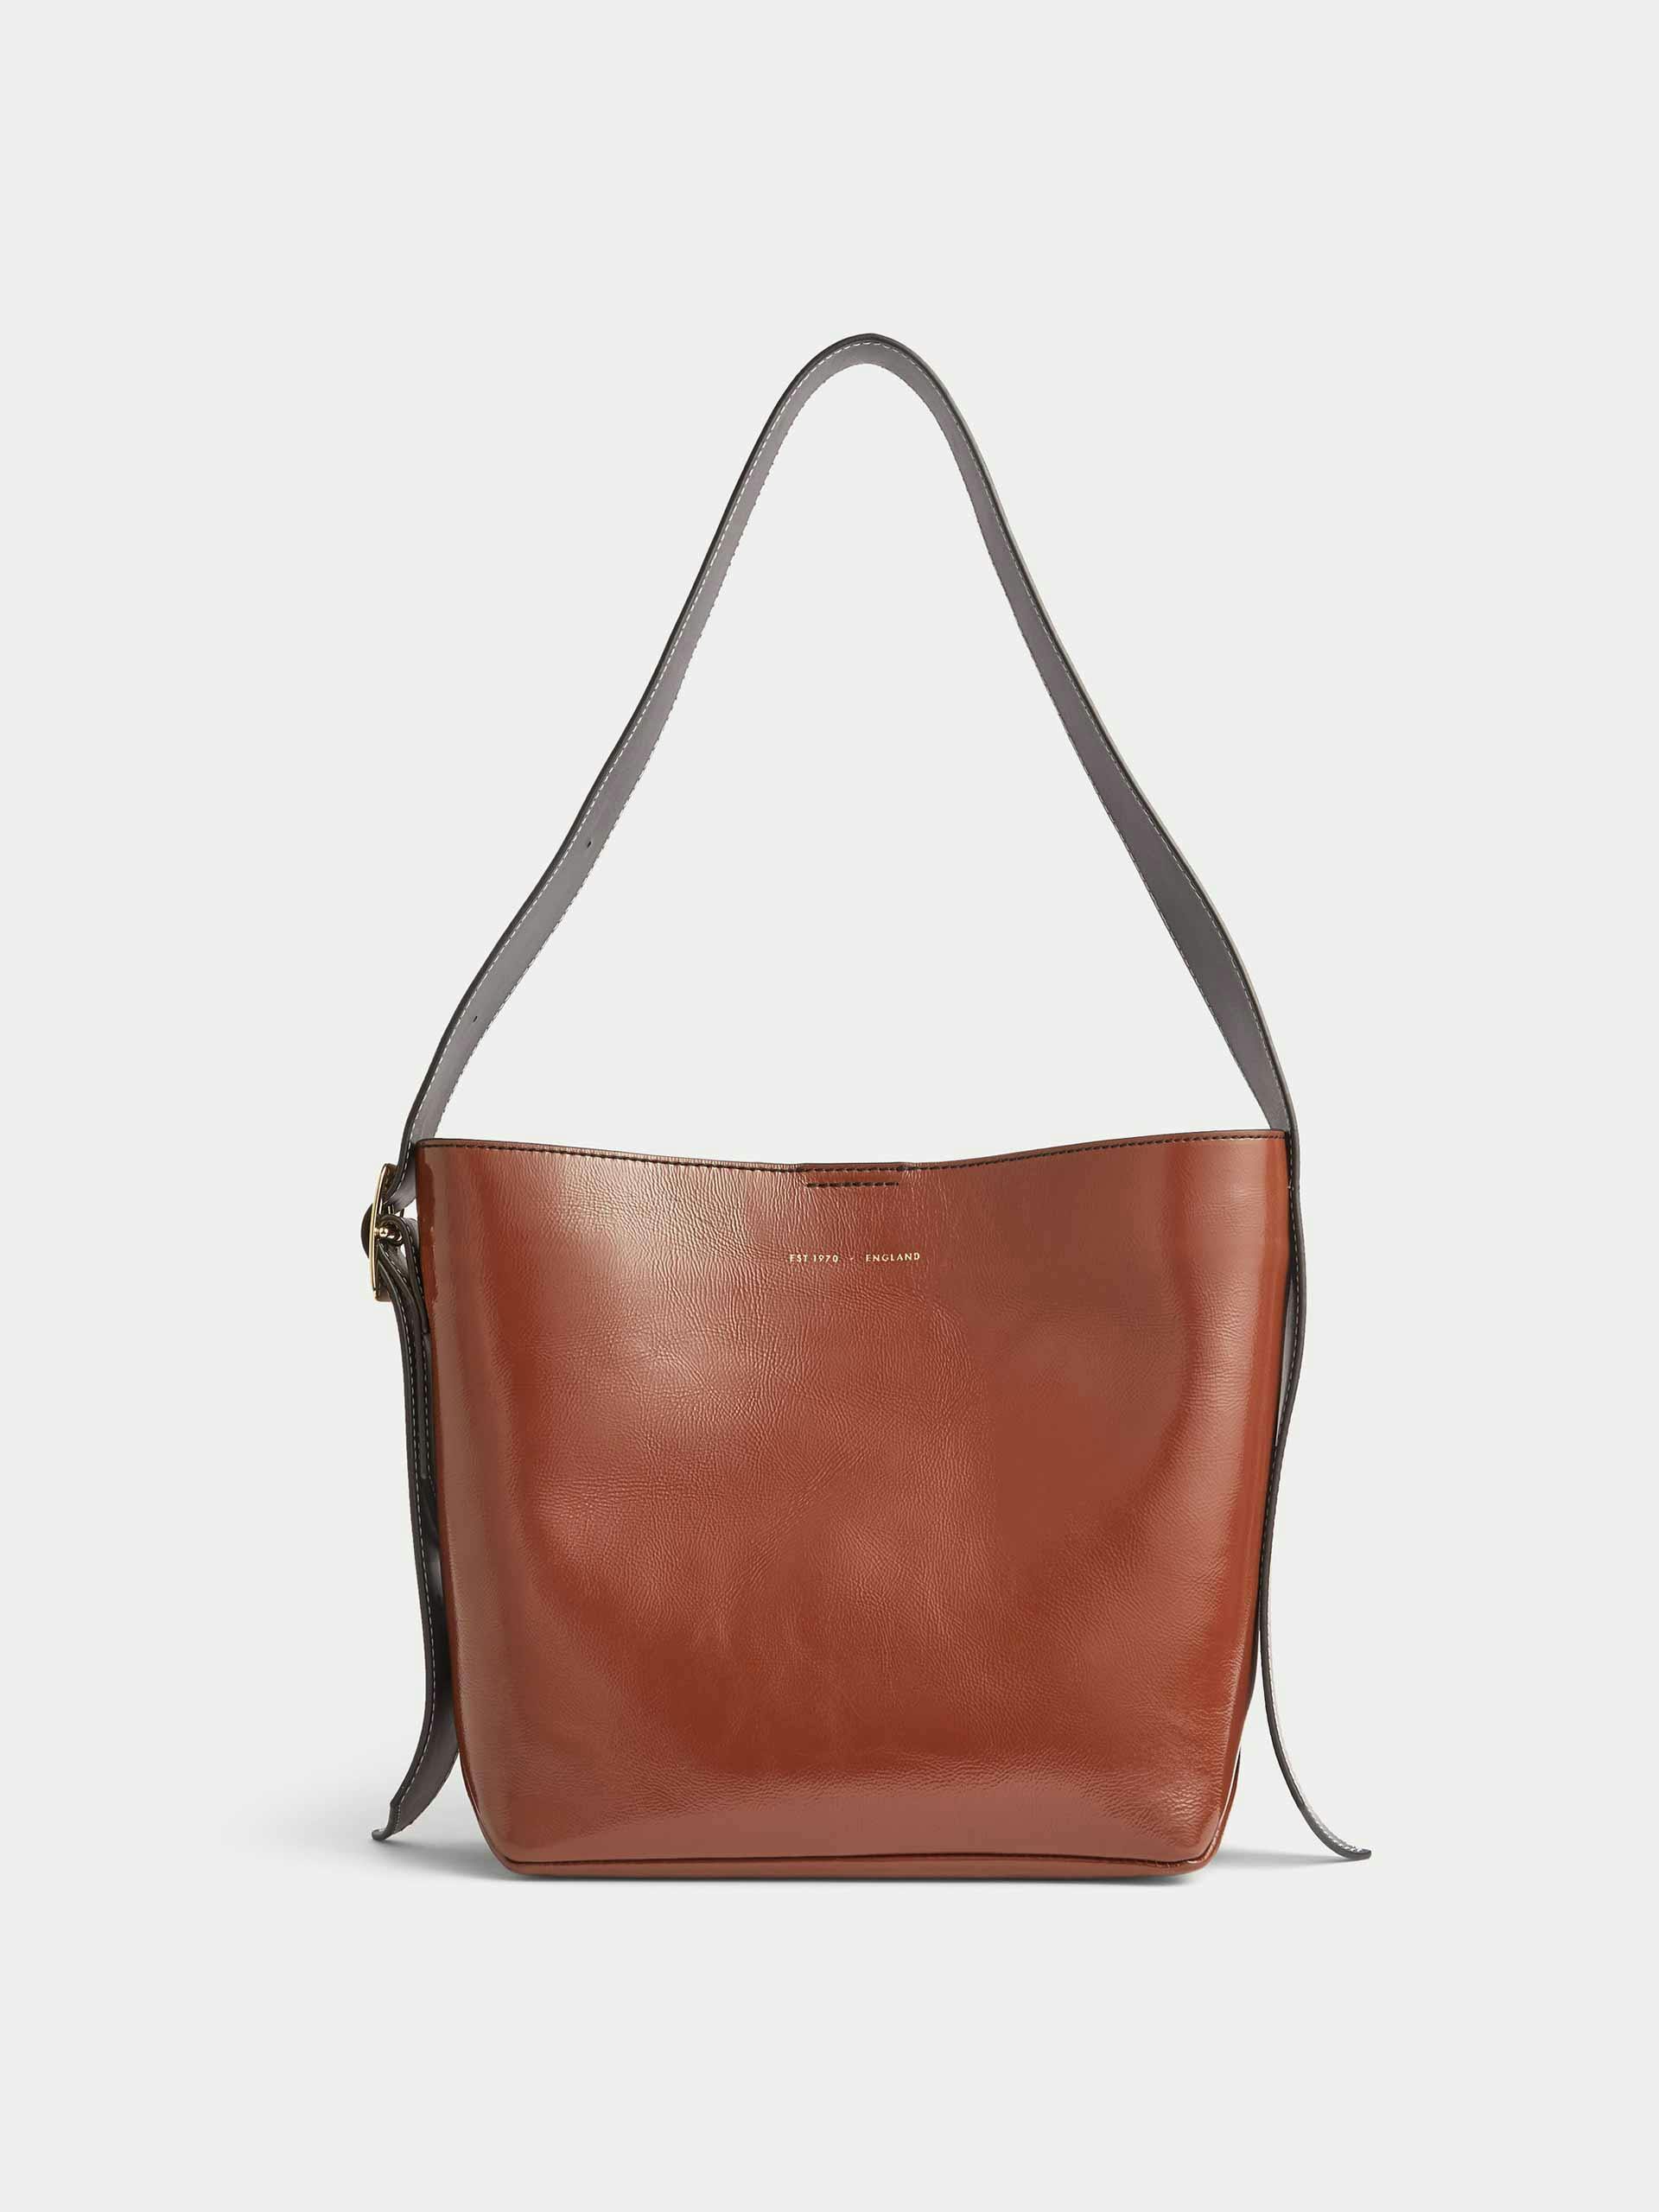 Leather tote bag with statement hardware